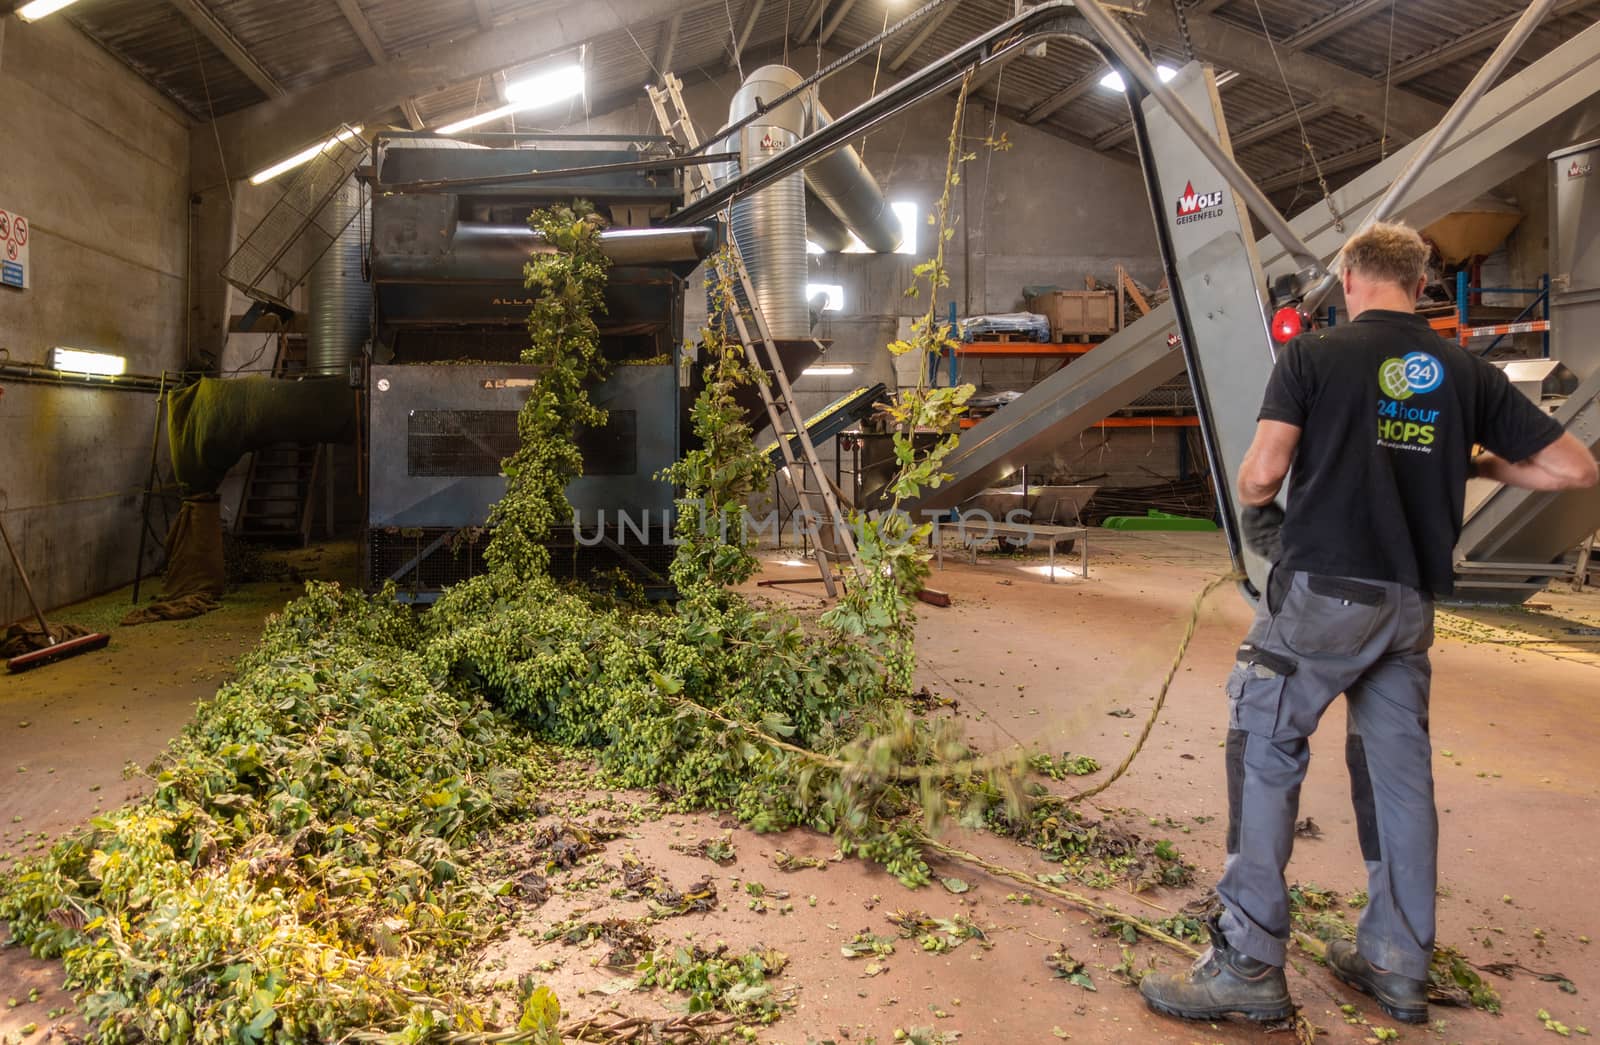 Proven, Flanders, Belgium - September 15, 2018: Inside barn, man connects freshly harvested hops plant strings to picking machine which separates the cones from the rest.